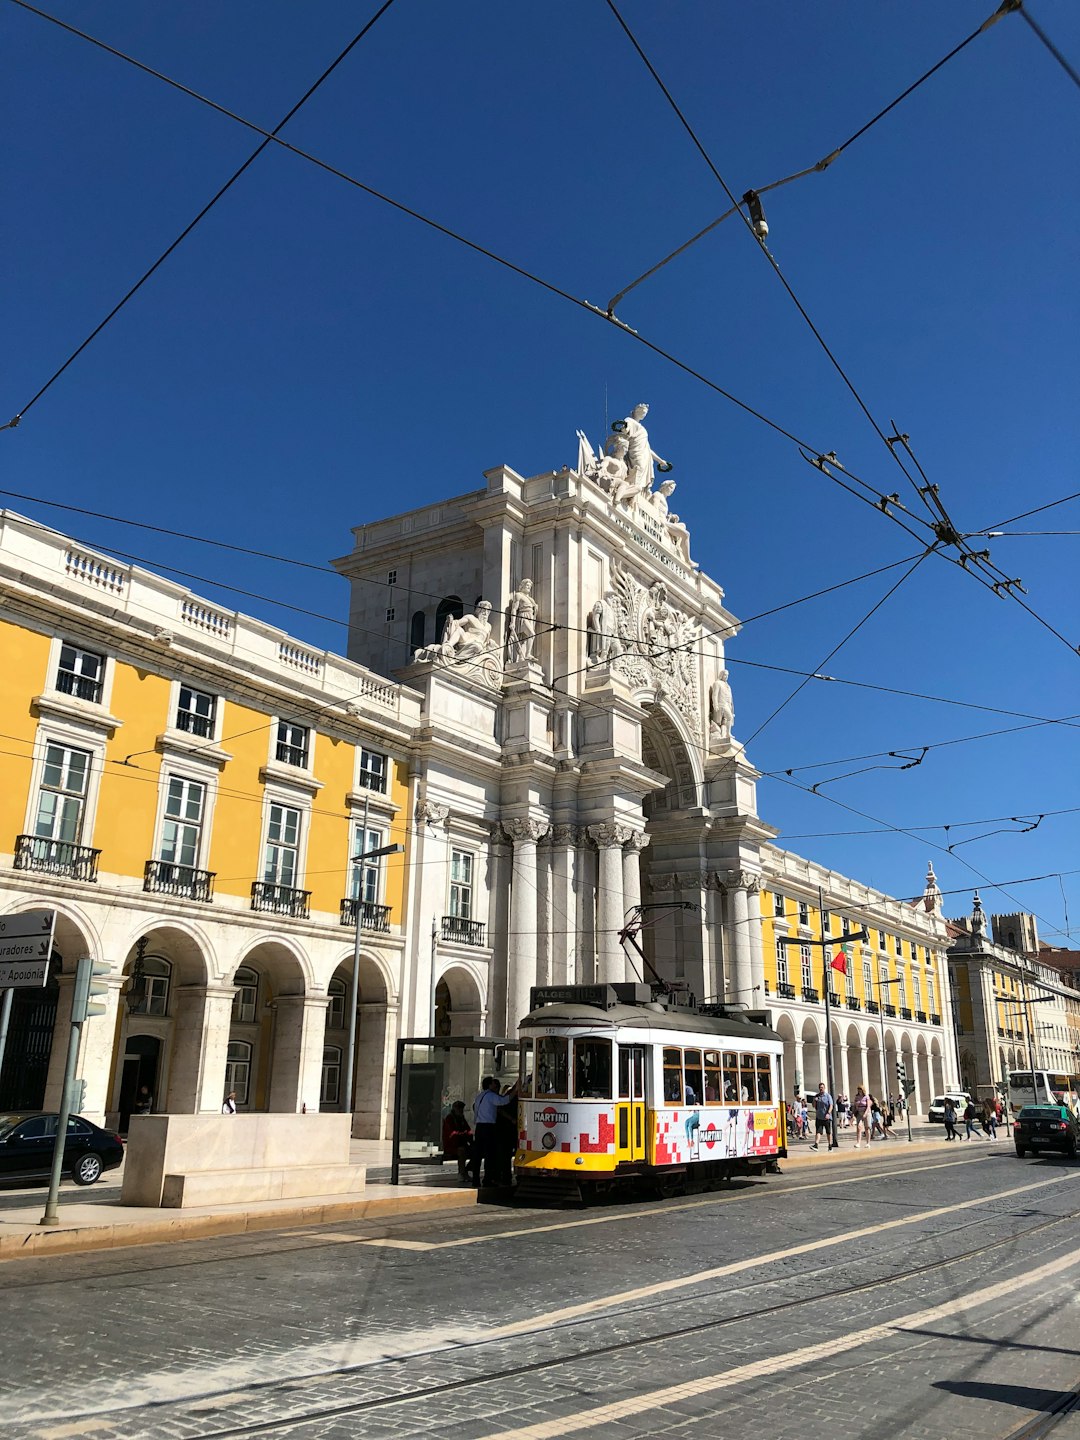 Travel Tips and Stories of Praça do Comércio in Portugal